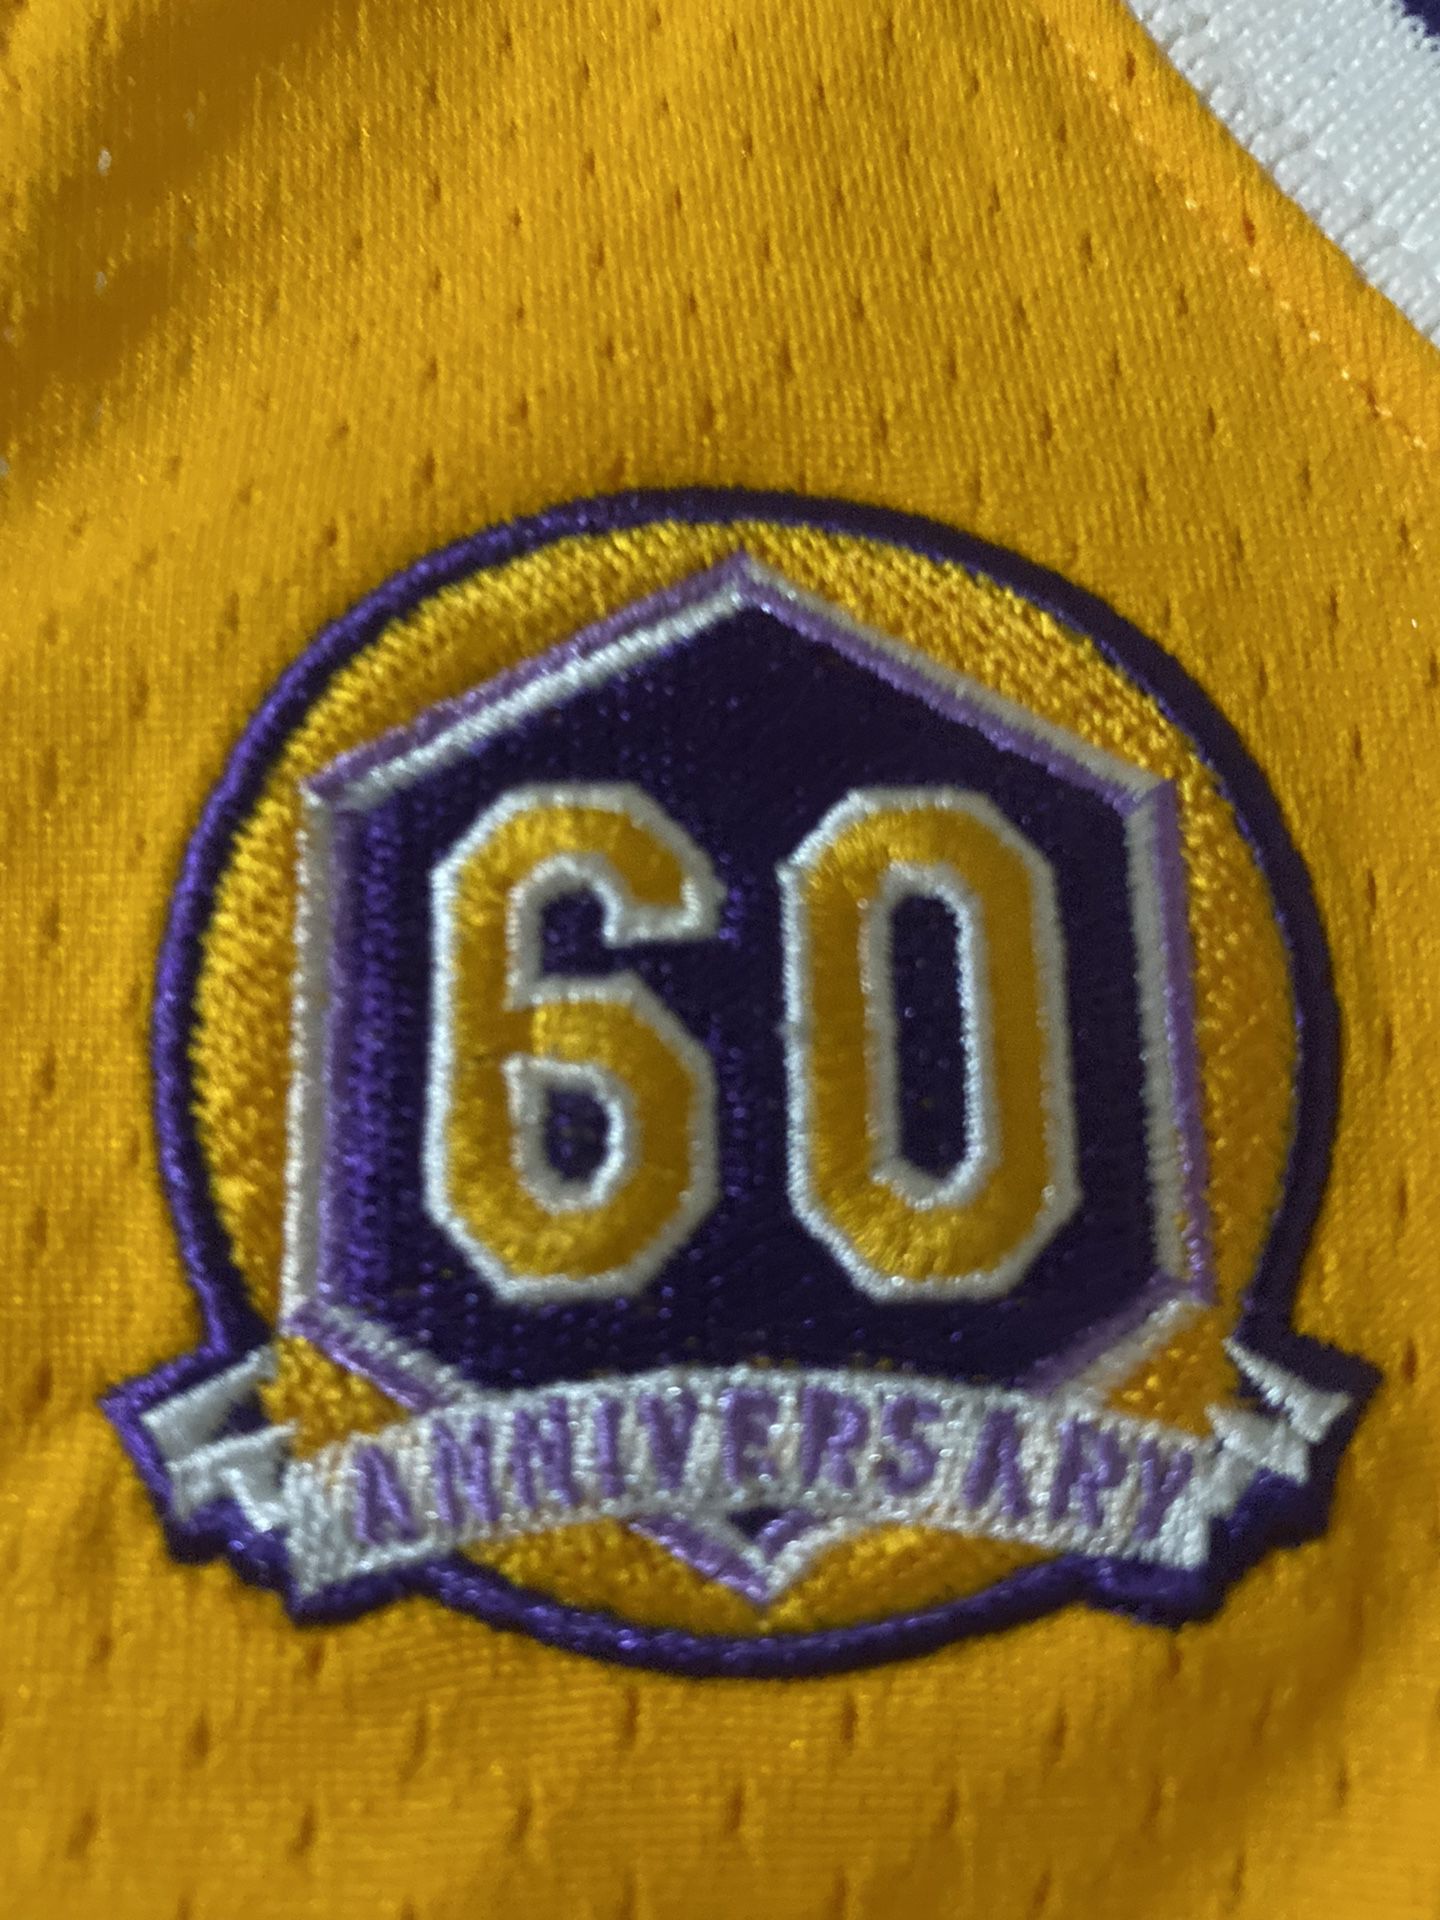 Authentic Kobe Bryant Jersey 60th Anniversary 07-08 for Sale in Buena Park,  CA - OfferUp